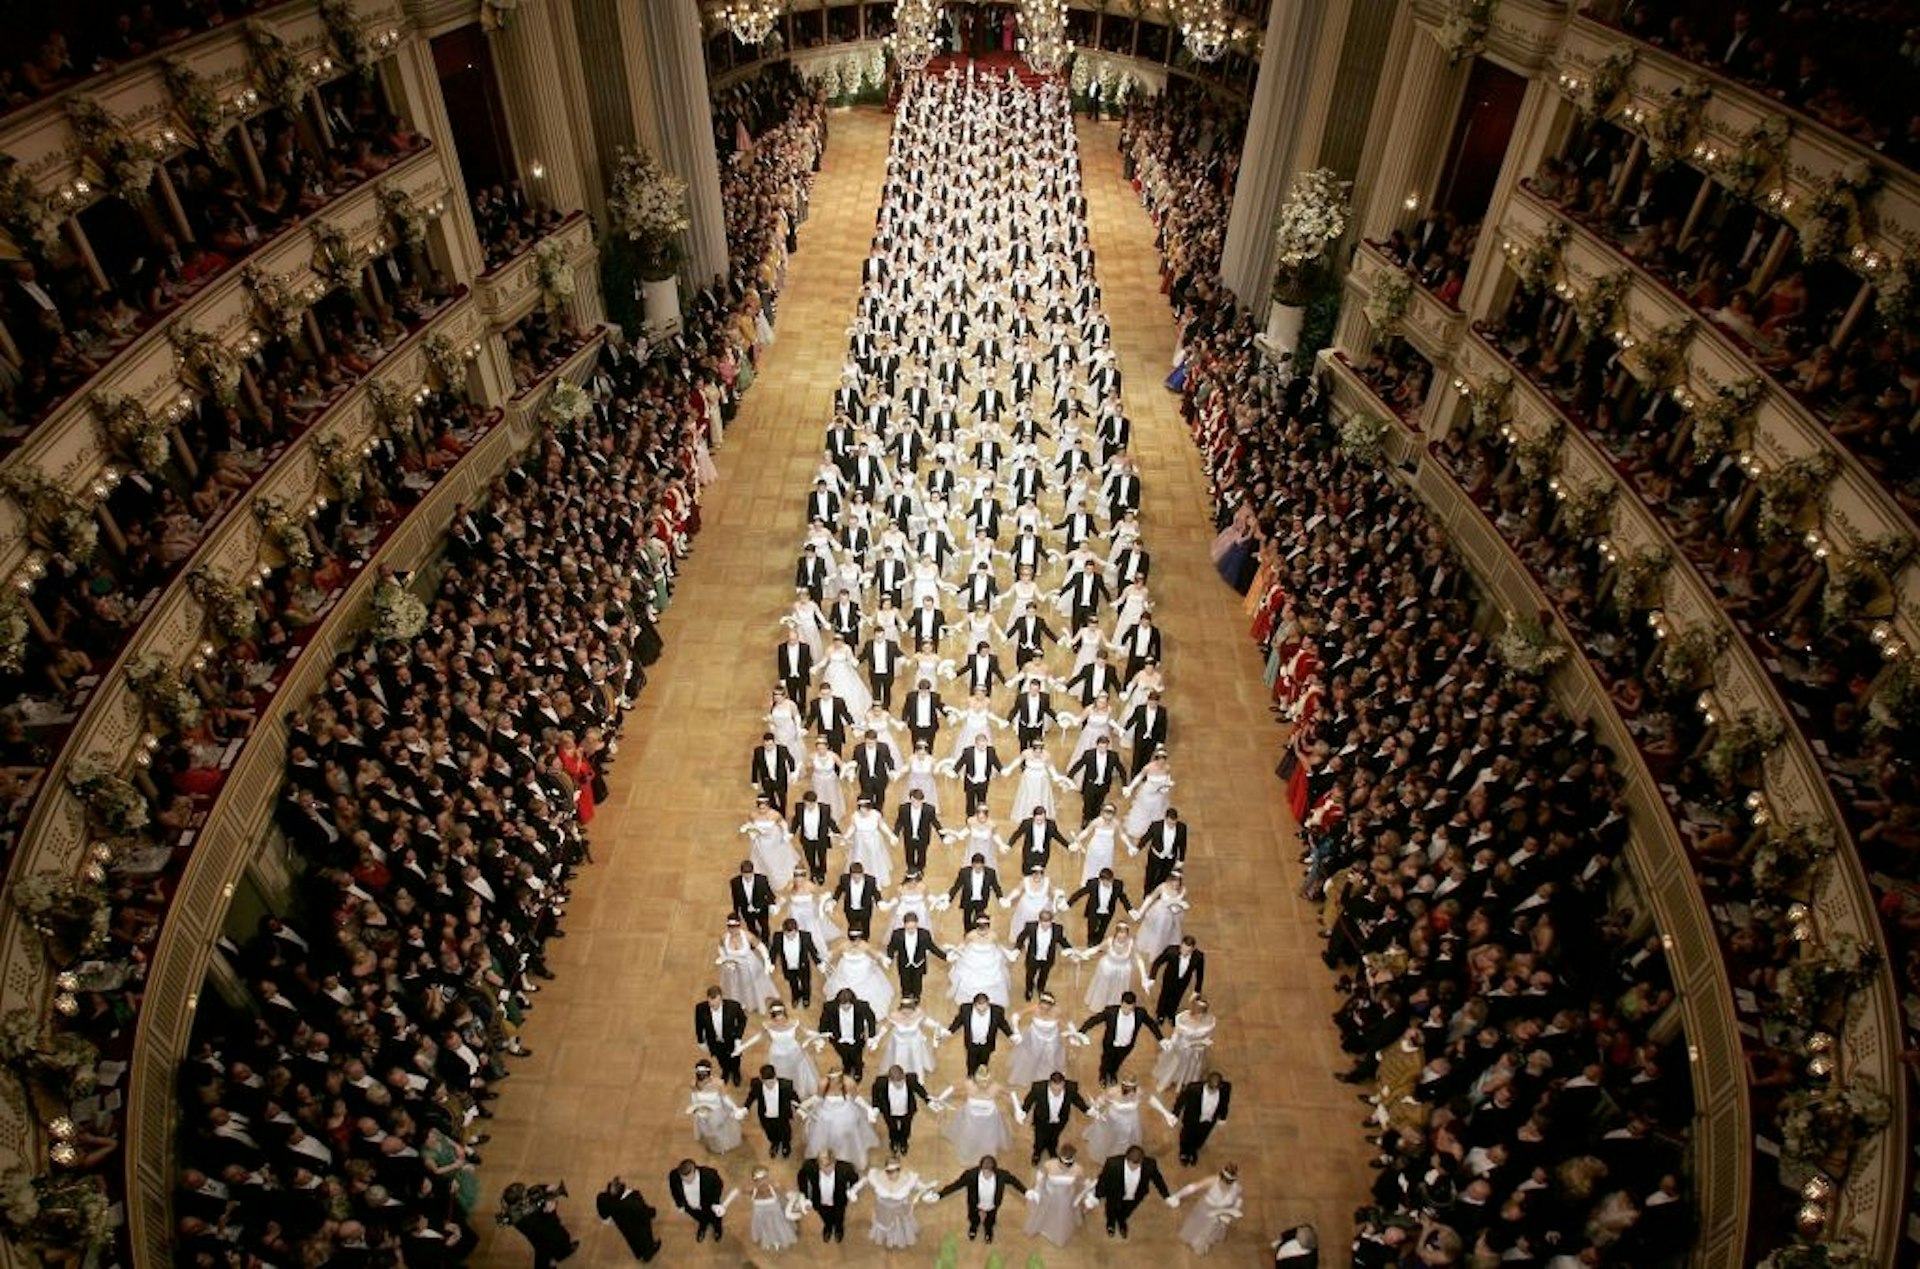 A top-down view of the Vienna Opera Ball, with men, dressed in black, and women, dressed in white, creating a crisscross pattern across the grand venue's large dancefloor.